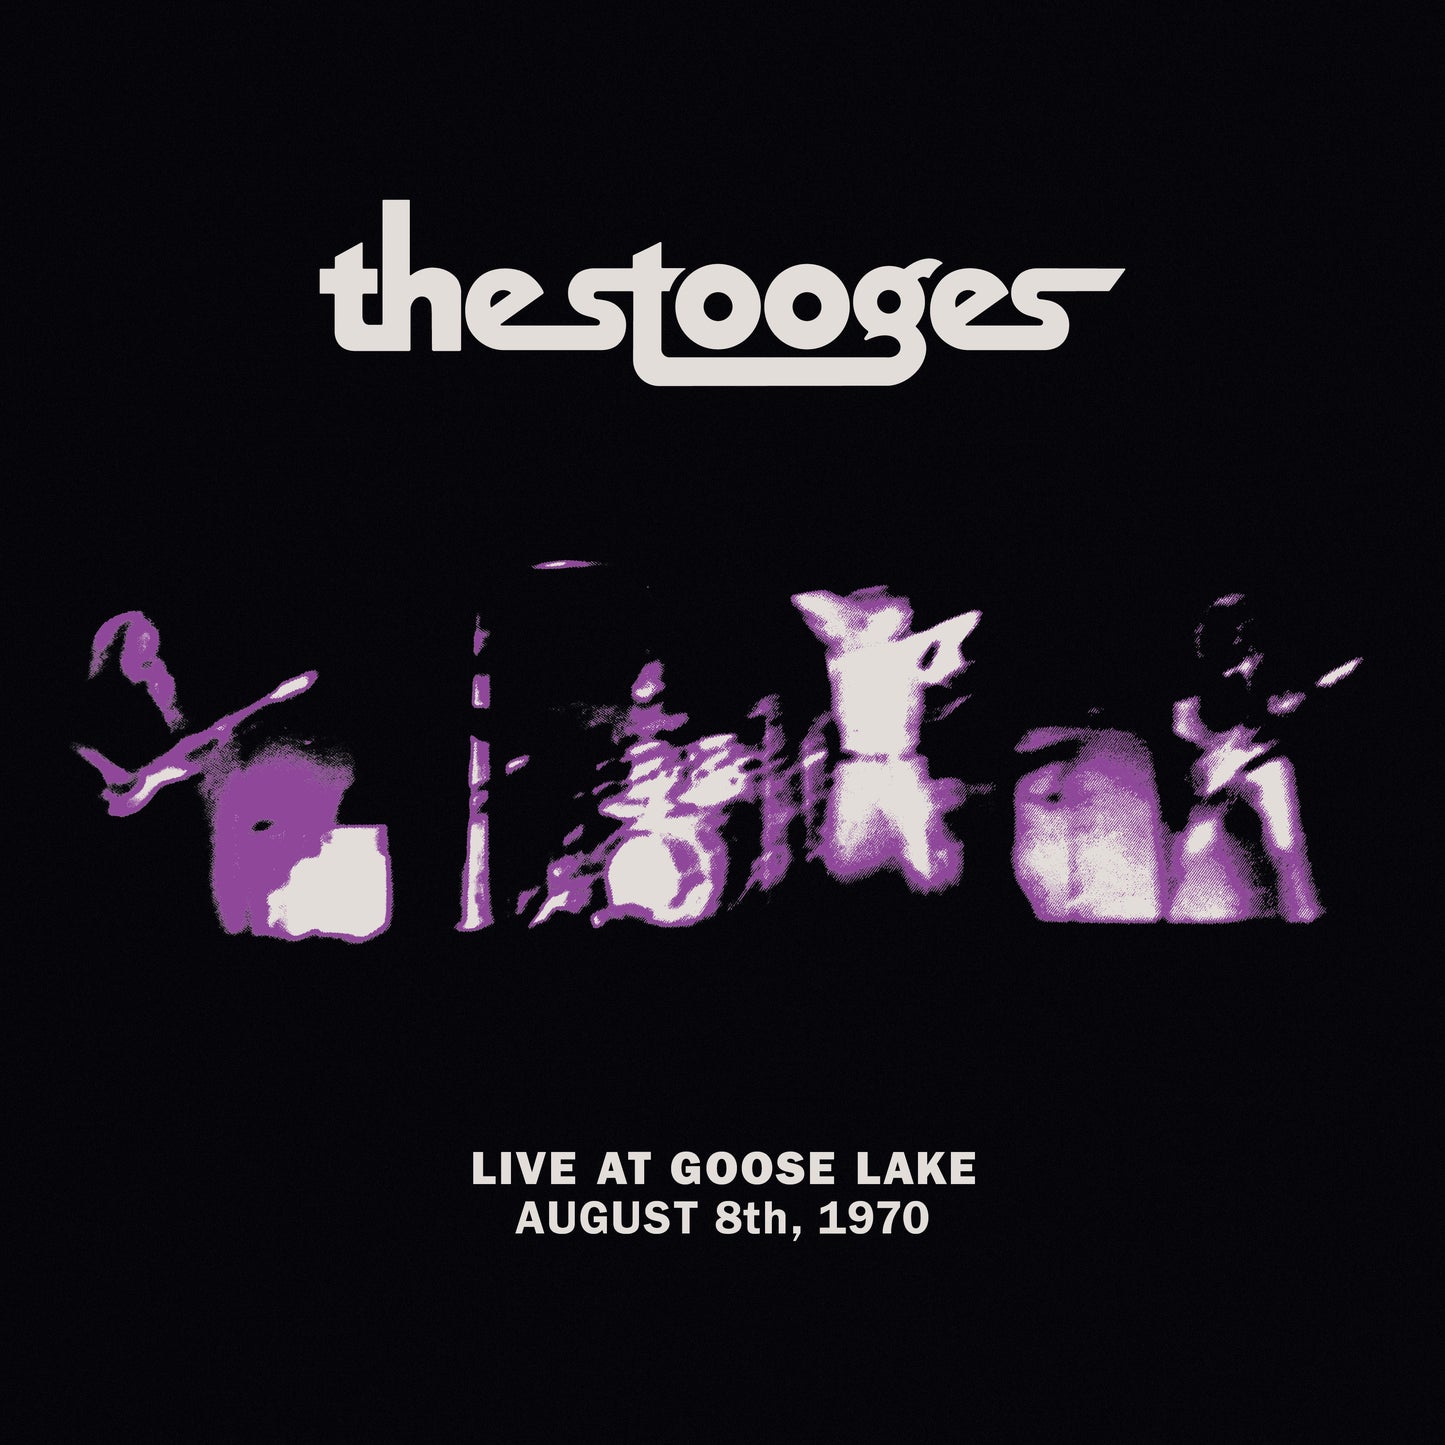 THE STOOGES - "LIVE AT GOOSE LAKE" LP